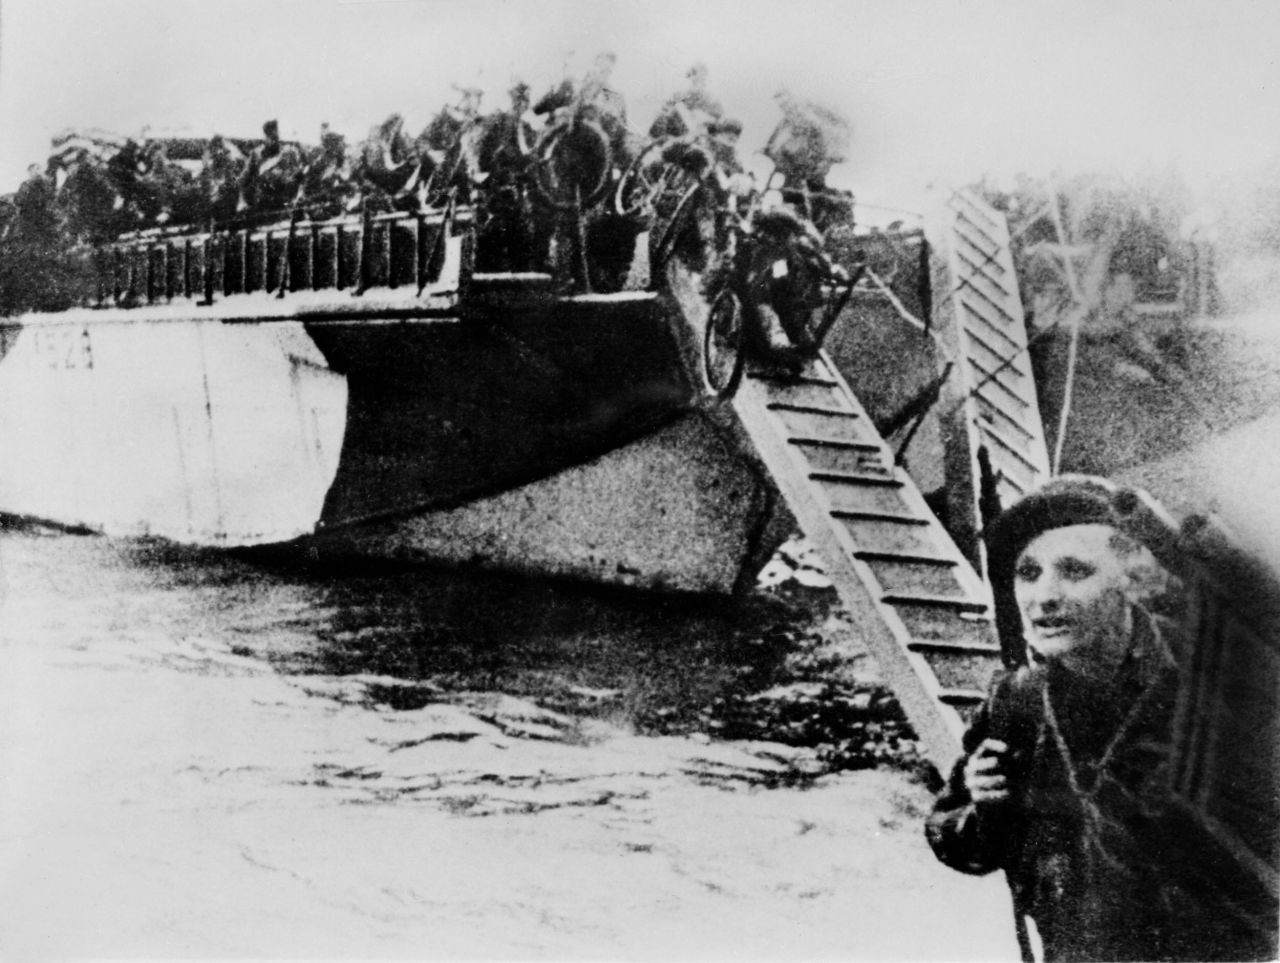 French commandos equipped with bicycles disembark from their landing craft after Allied forces stormed the Normandy beaches. Germans rained mortars and artillery down on Allied troops, killing many before they could even get out of their boats. Fighting was especially fierce at Omaha Beach, where Nazi fighters nearly wiped out the first wave of invading forces and left the survivors struggling for cover.